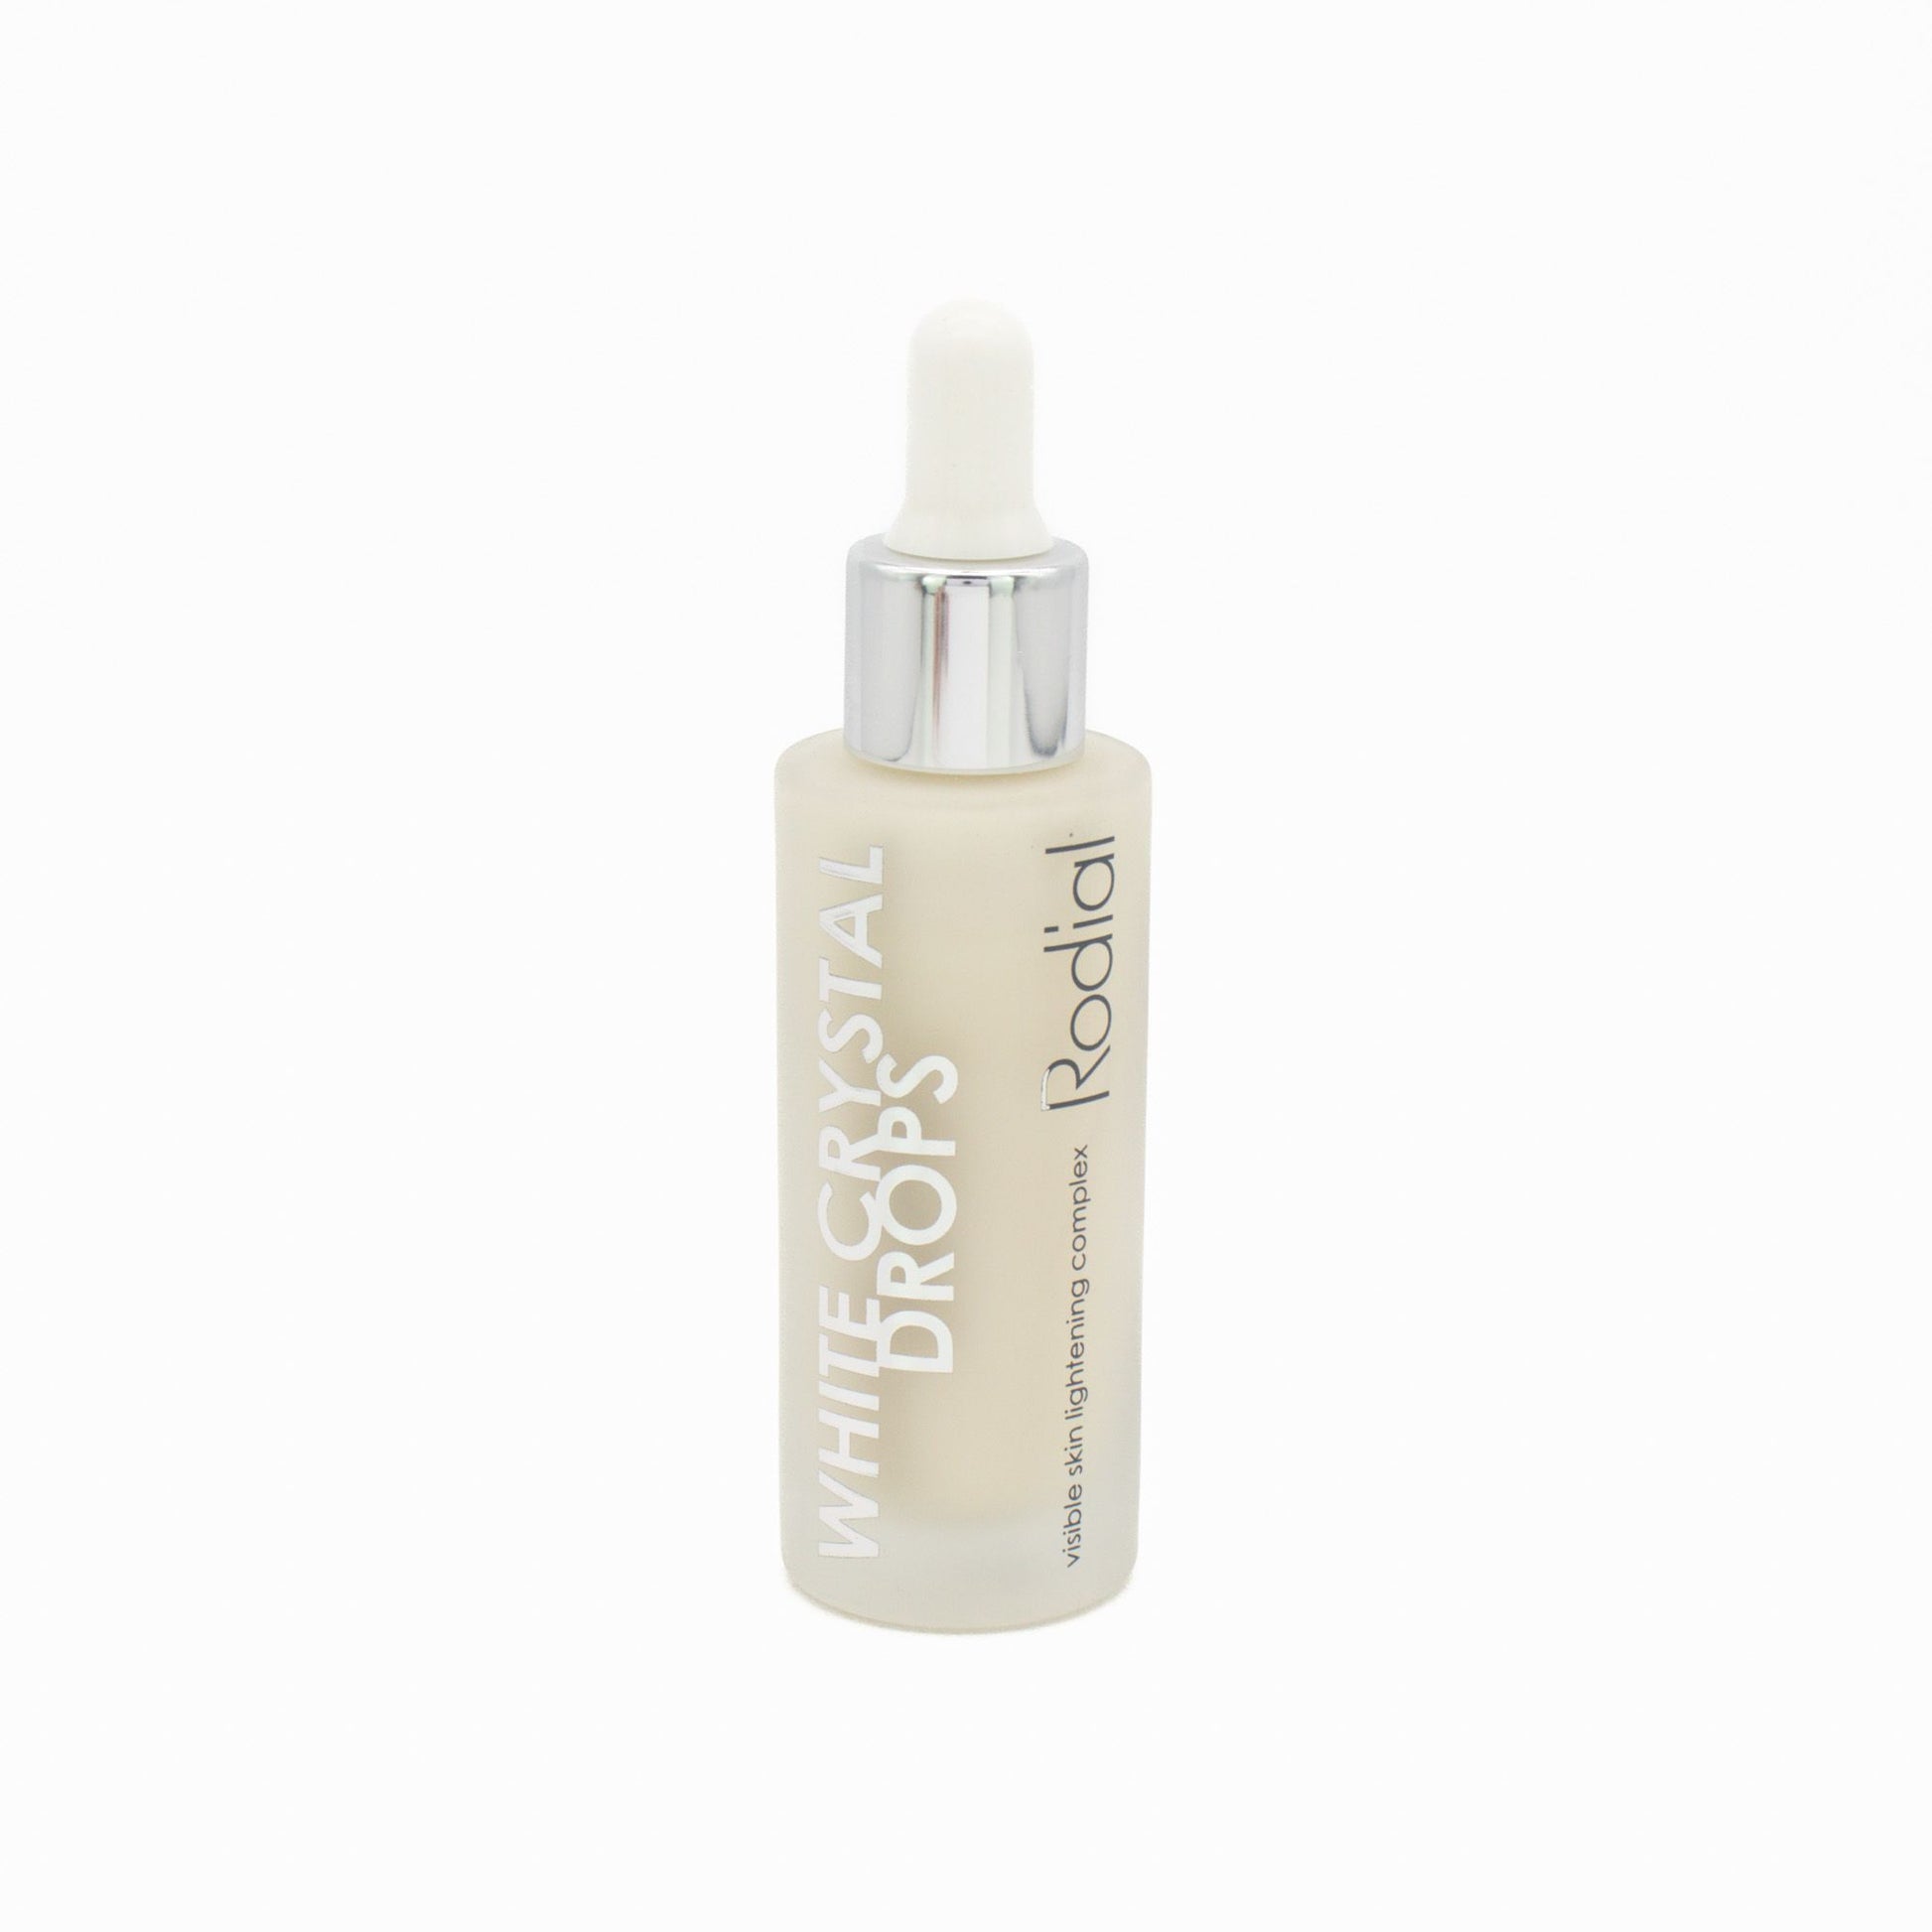 Rodial White Crystal Drops Visible Skin Lightening Complex 31ml - Imperfect Box - This is Beauty UK